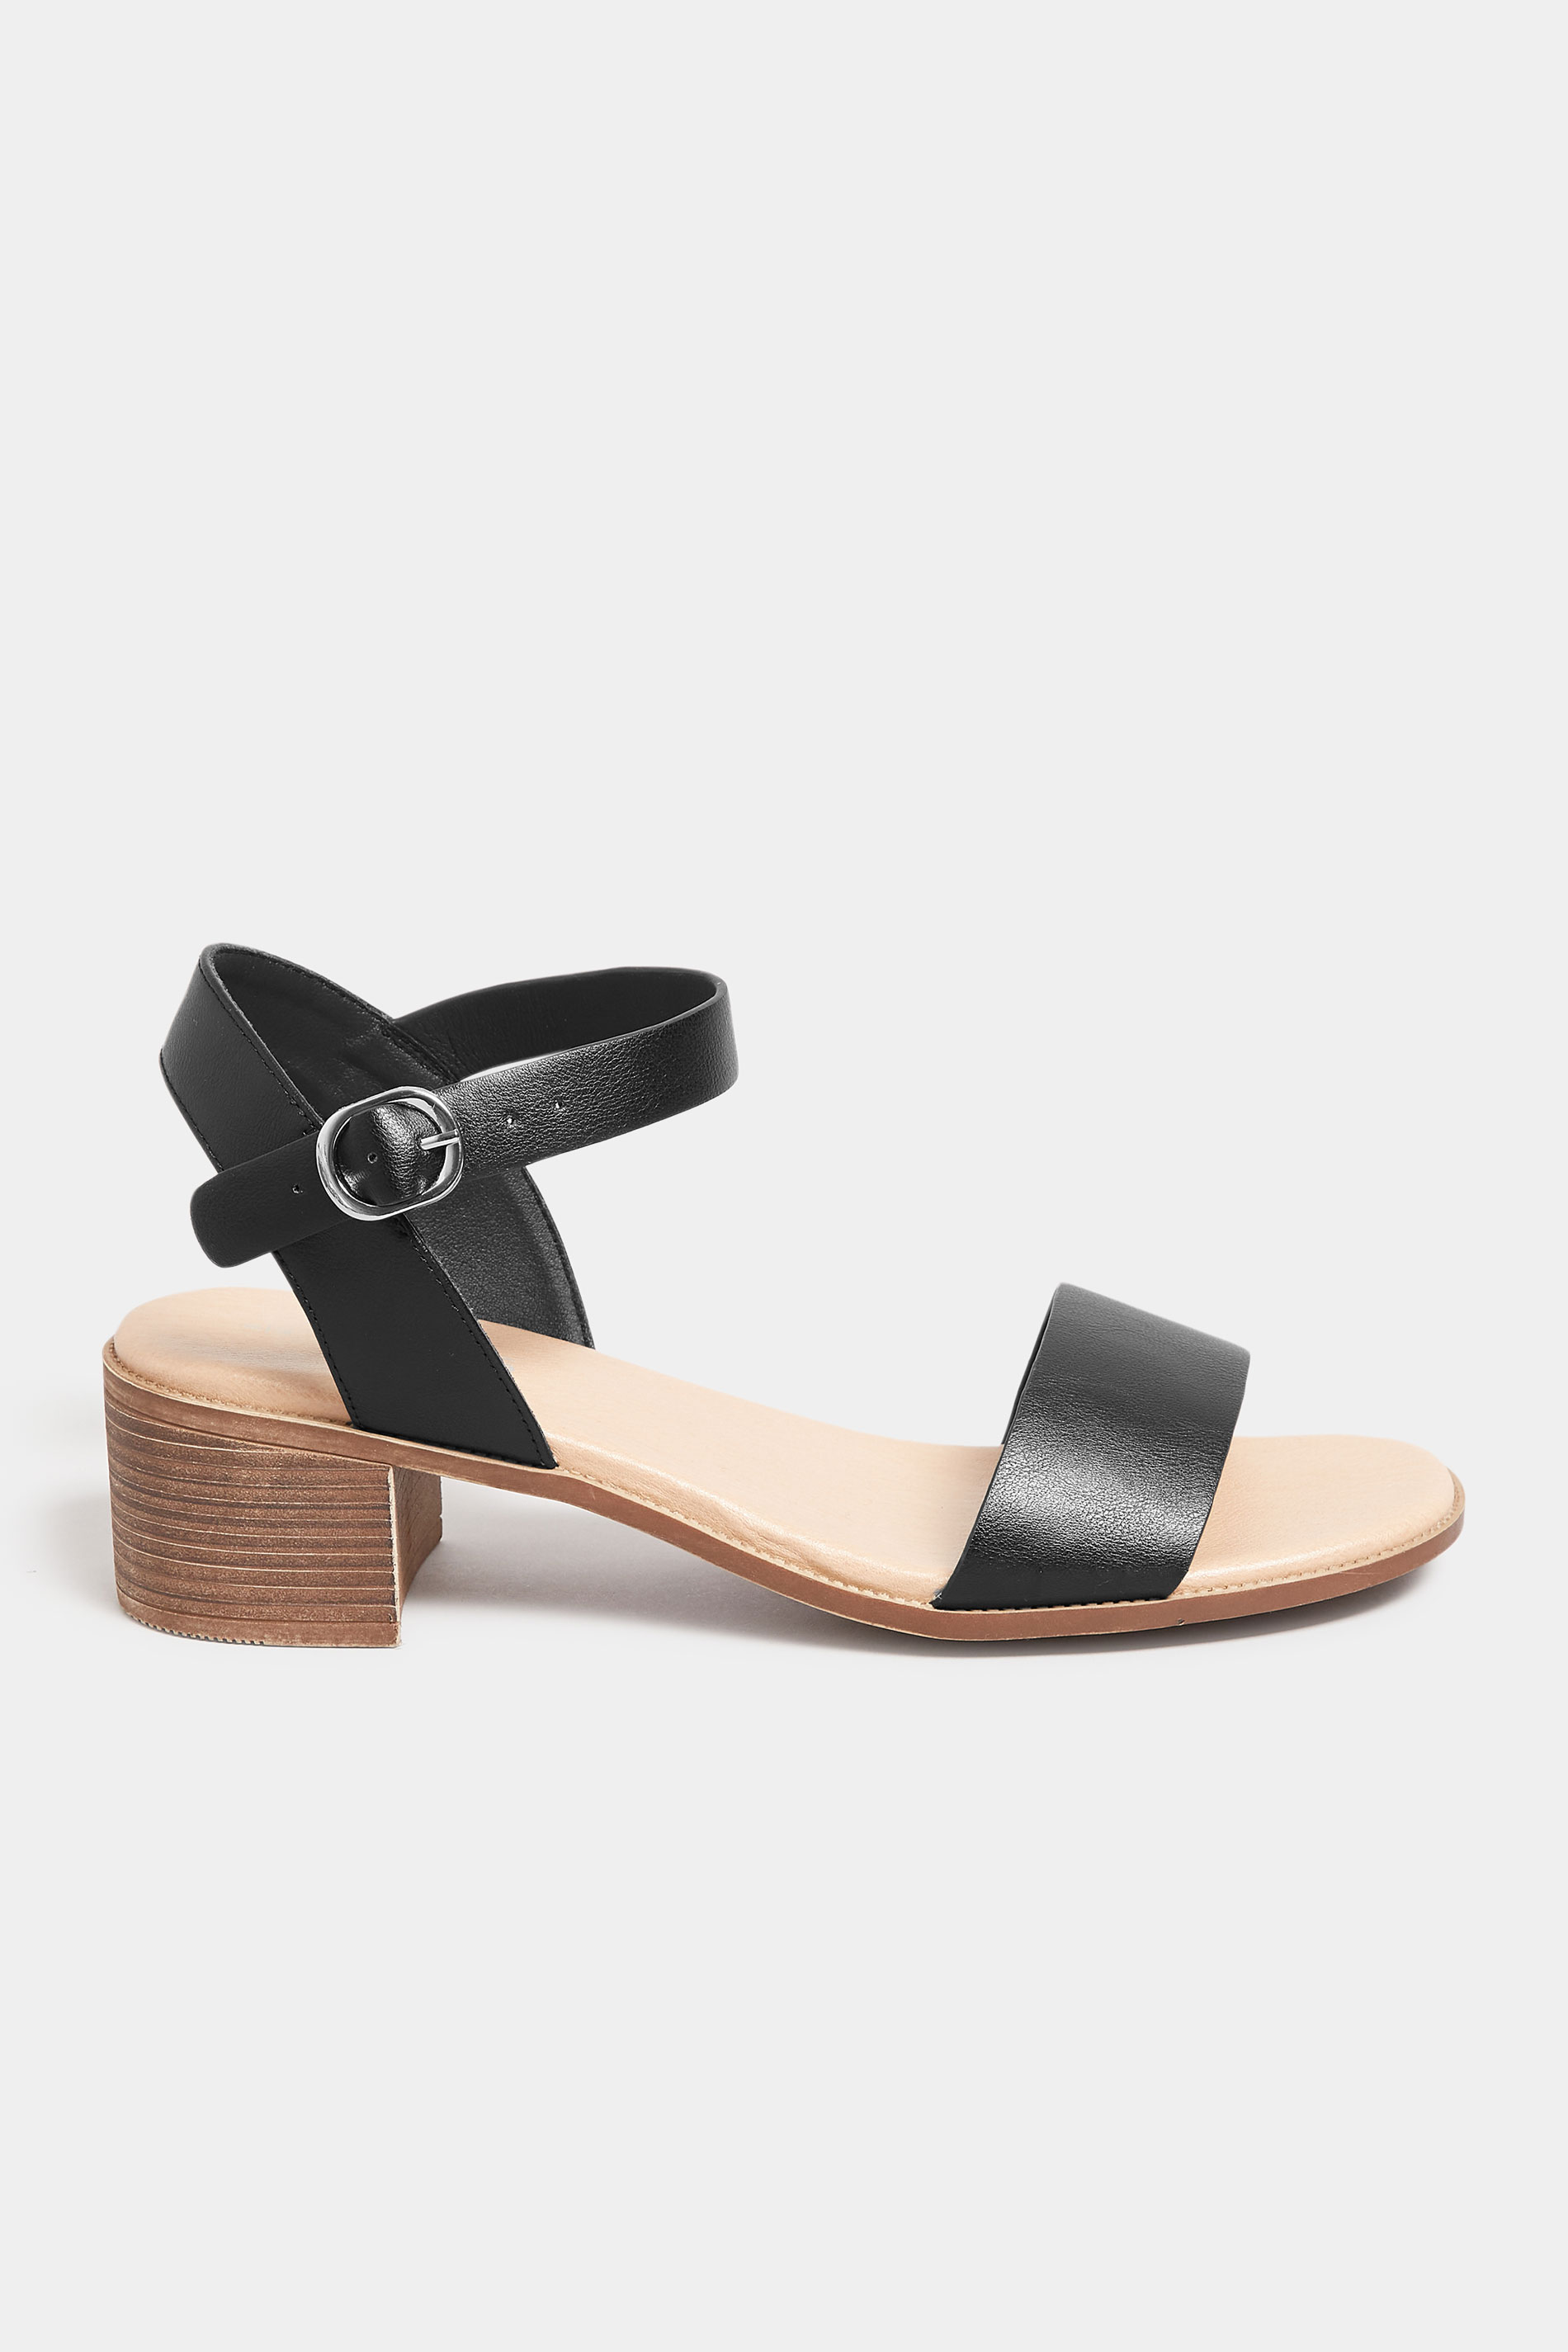 Black Strappy Low Heel Sandals In Extra Wide EEE Fit | Yours Clothing